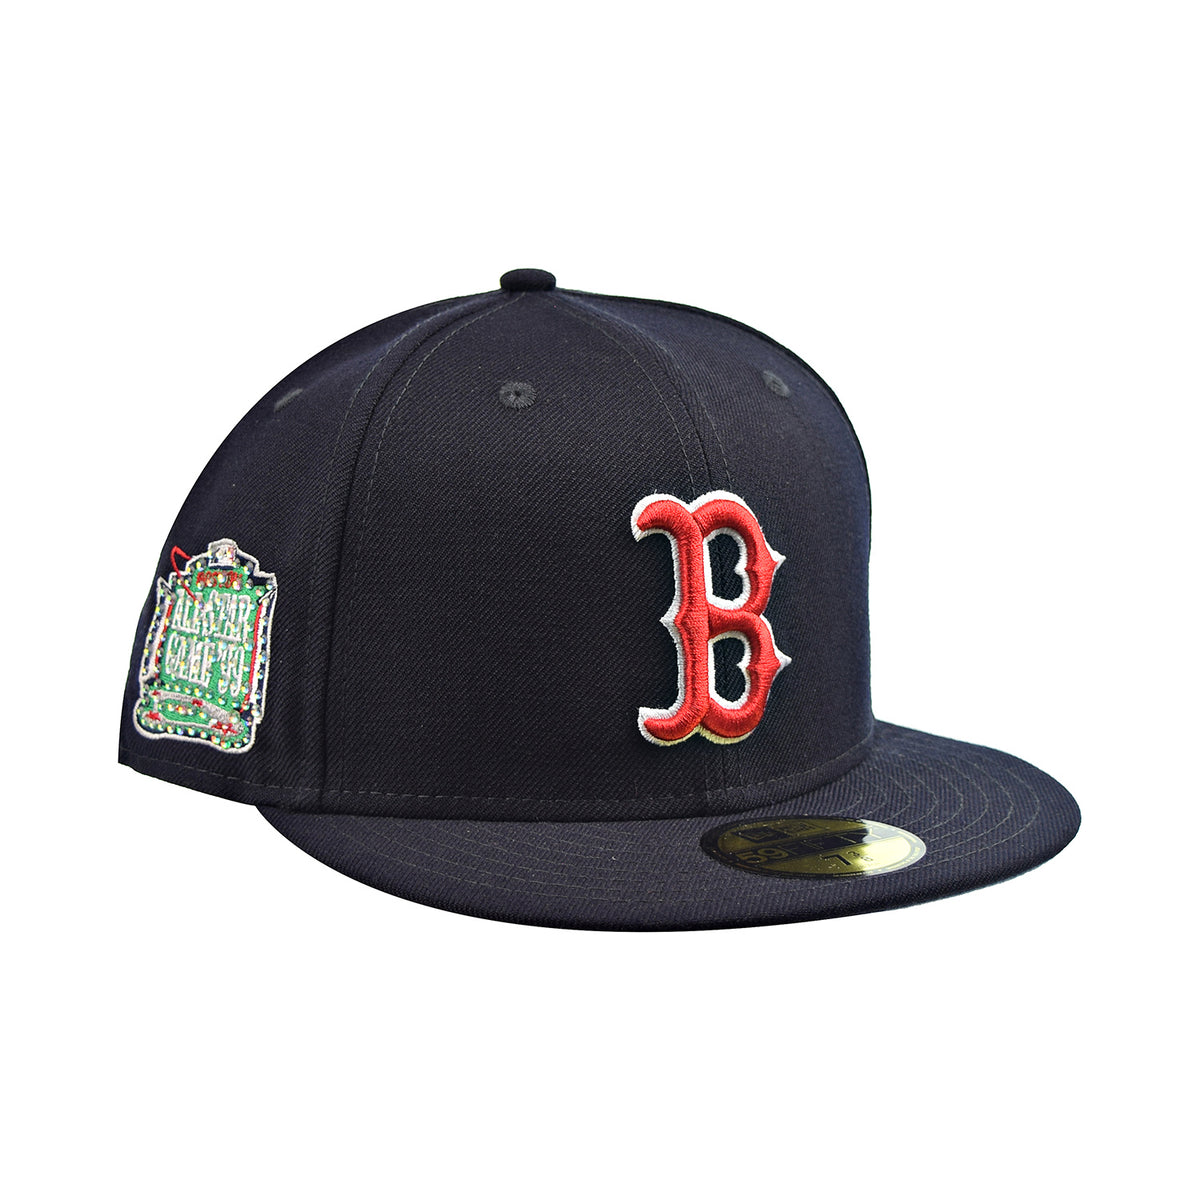 Men's New Era Light blue/navy Boston Red Sox Green Undervisor 59FIFTY Fitted Hat